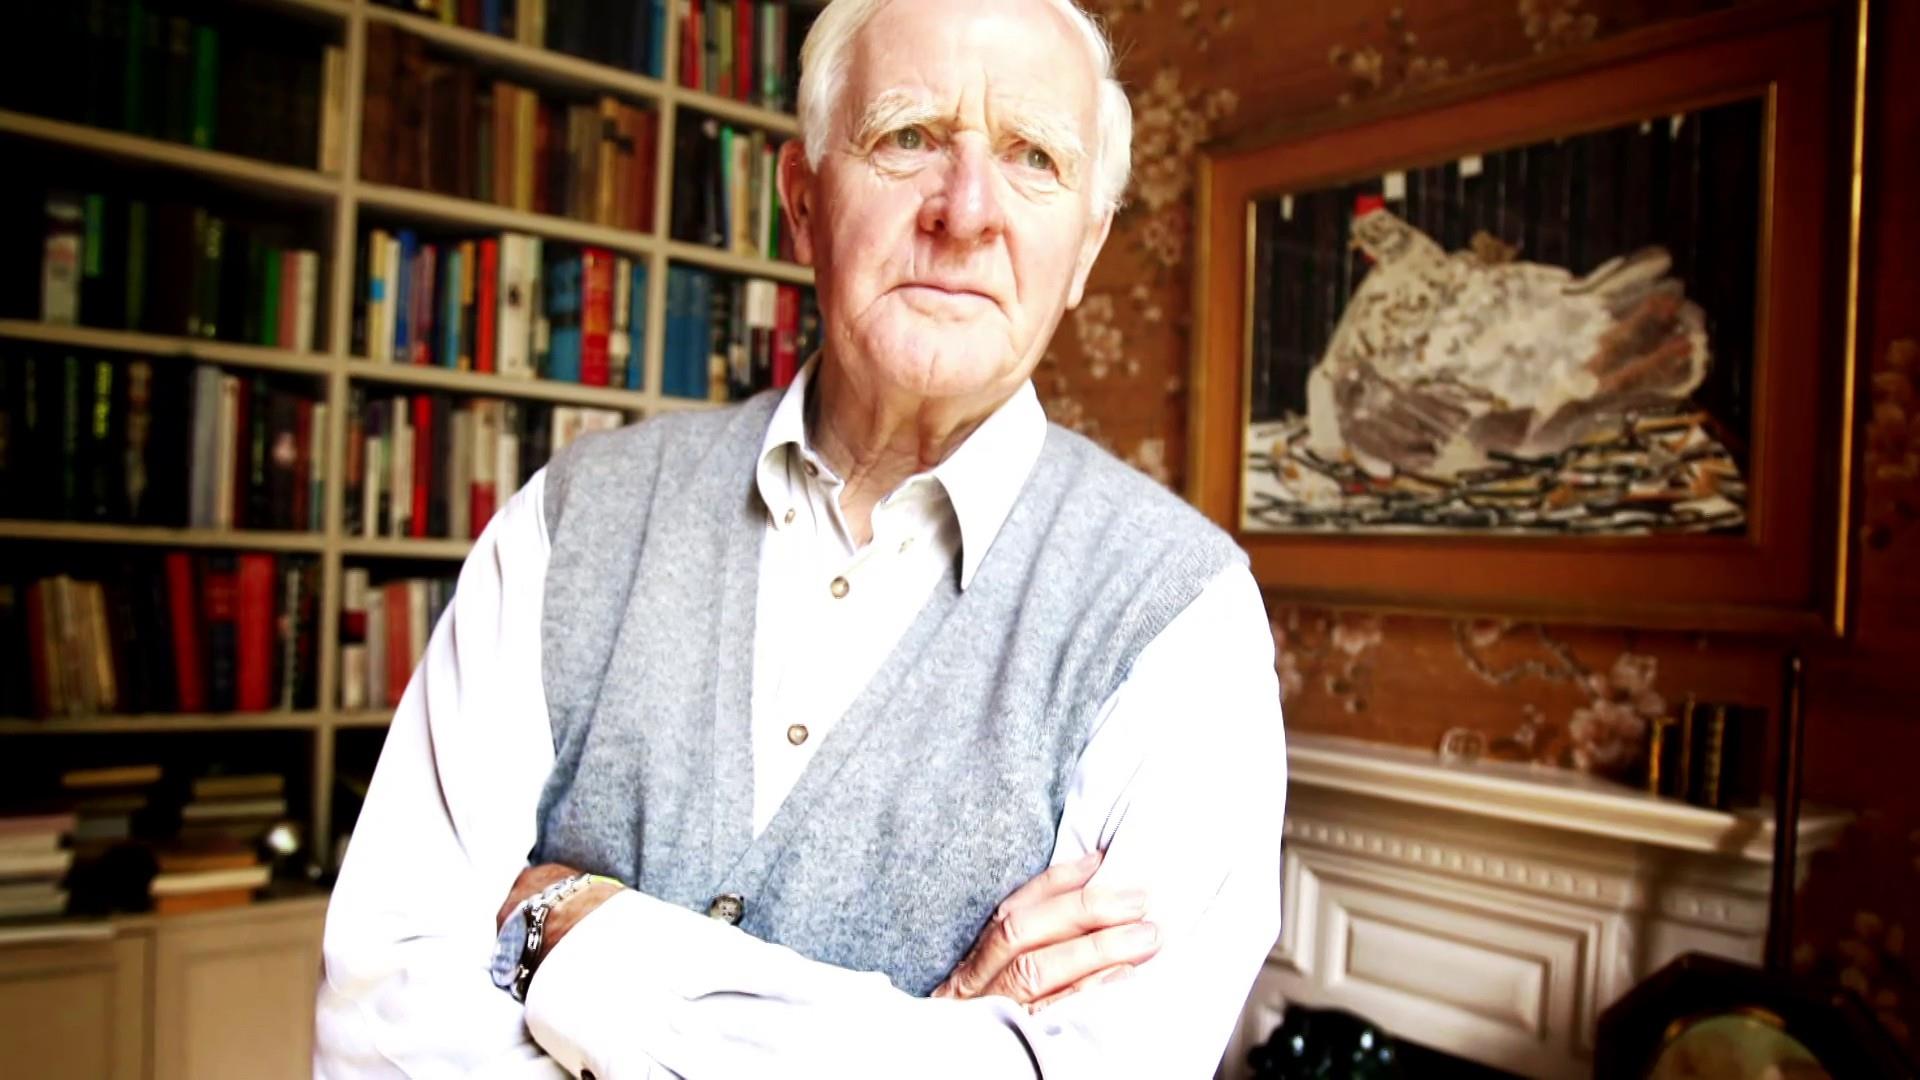 Watch TODAY Highlight: Spy novelist John le Carre mourned by fans after ...